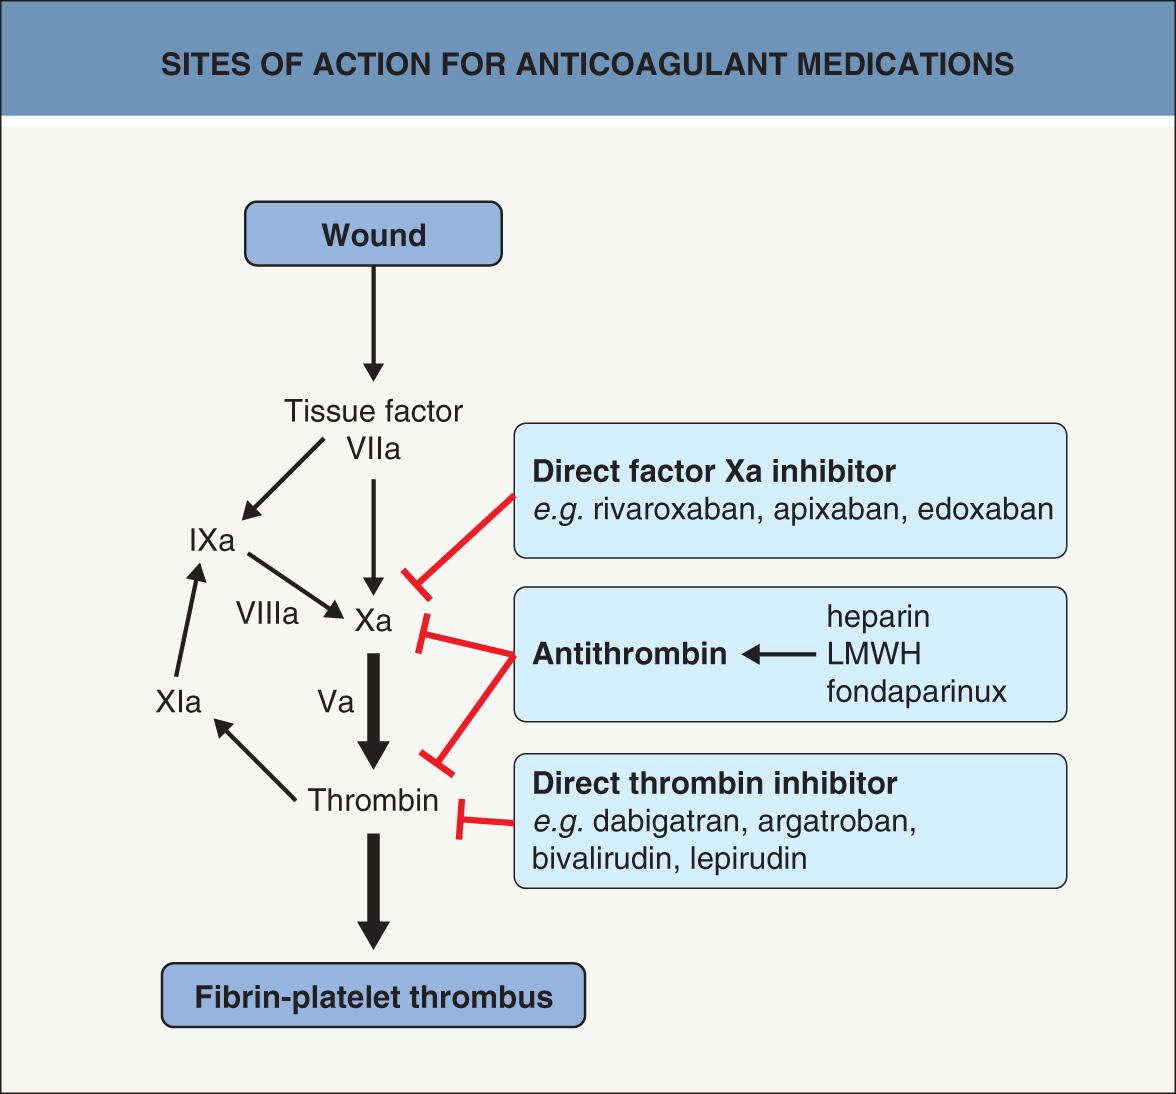 Fig. 22.5, Sites of action for anticoagulant medications.